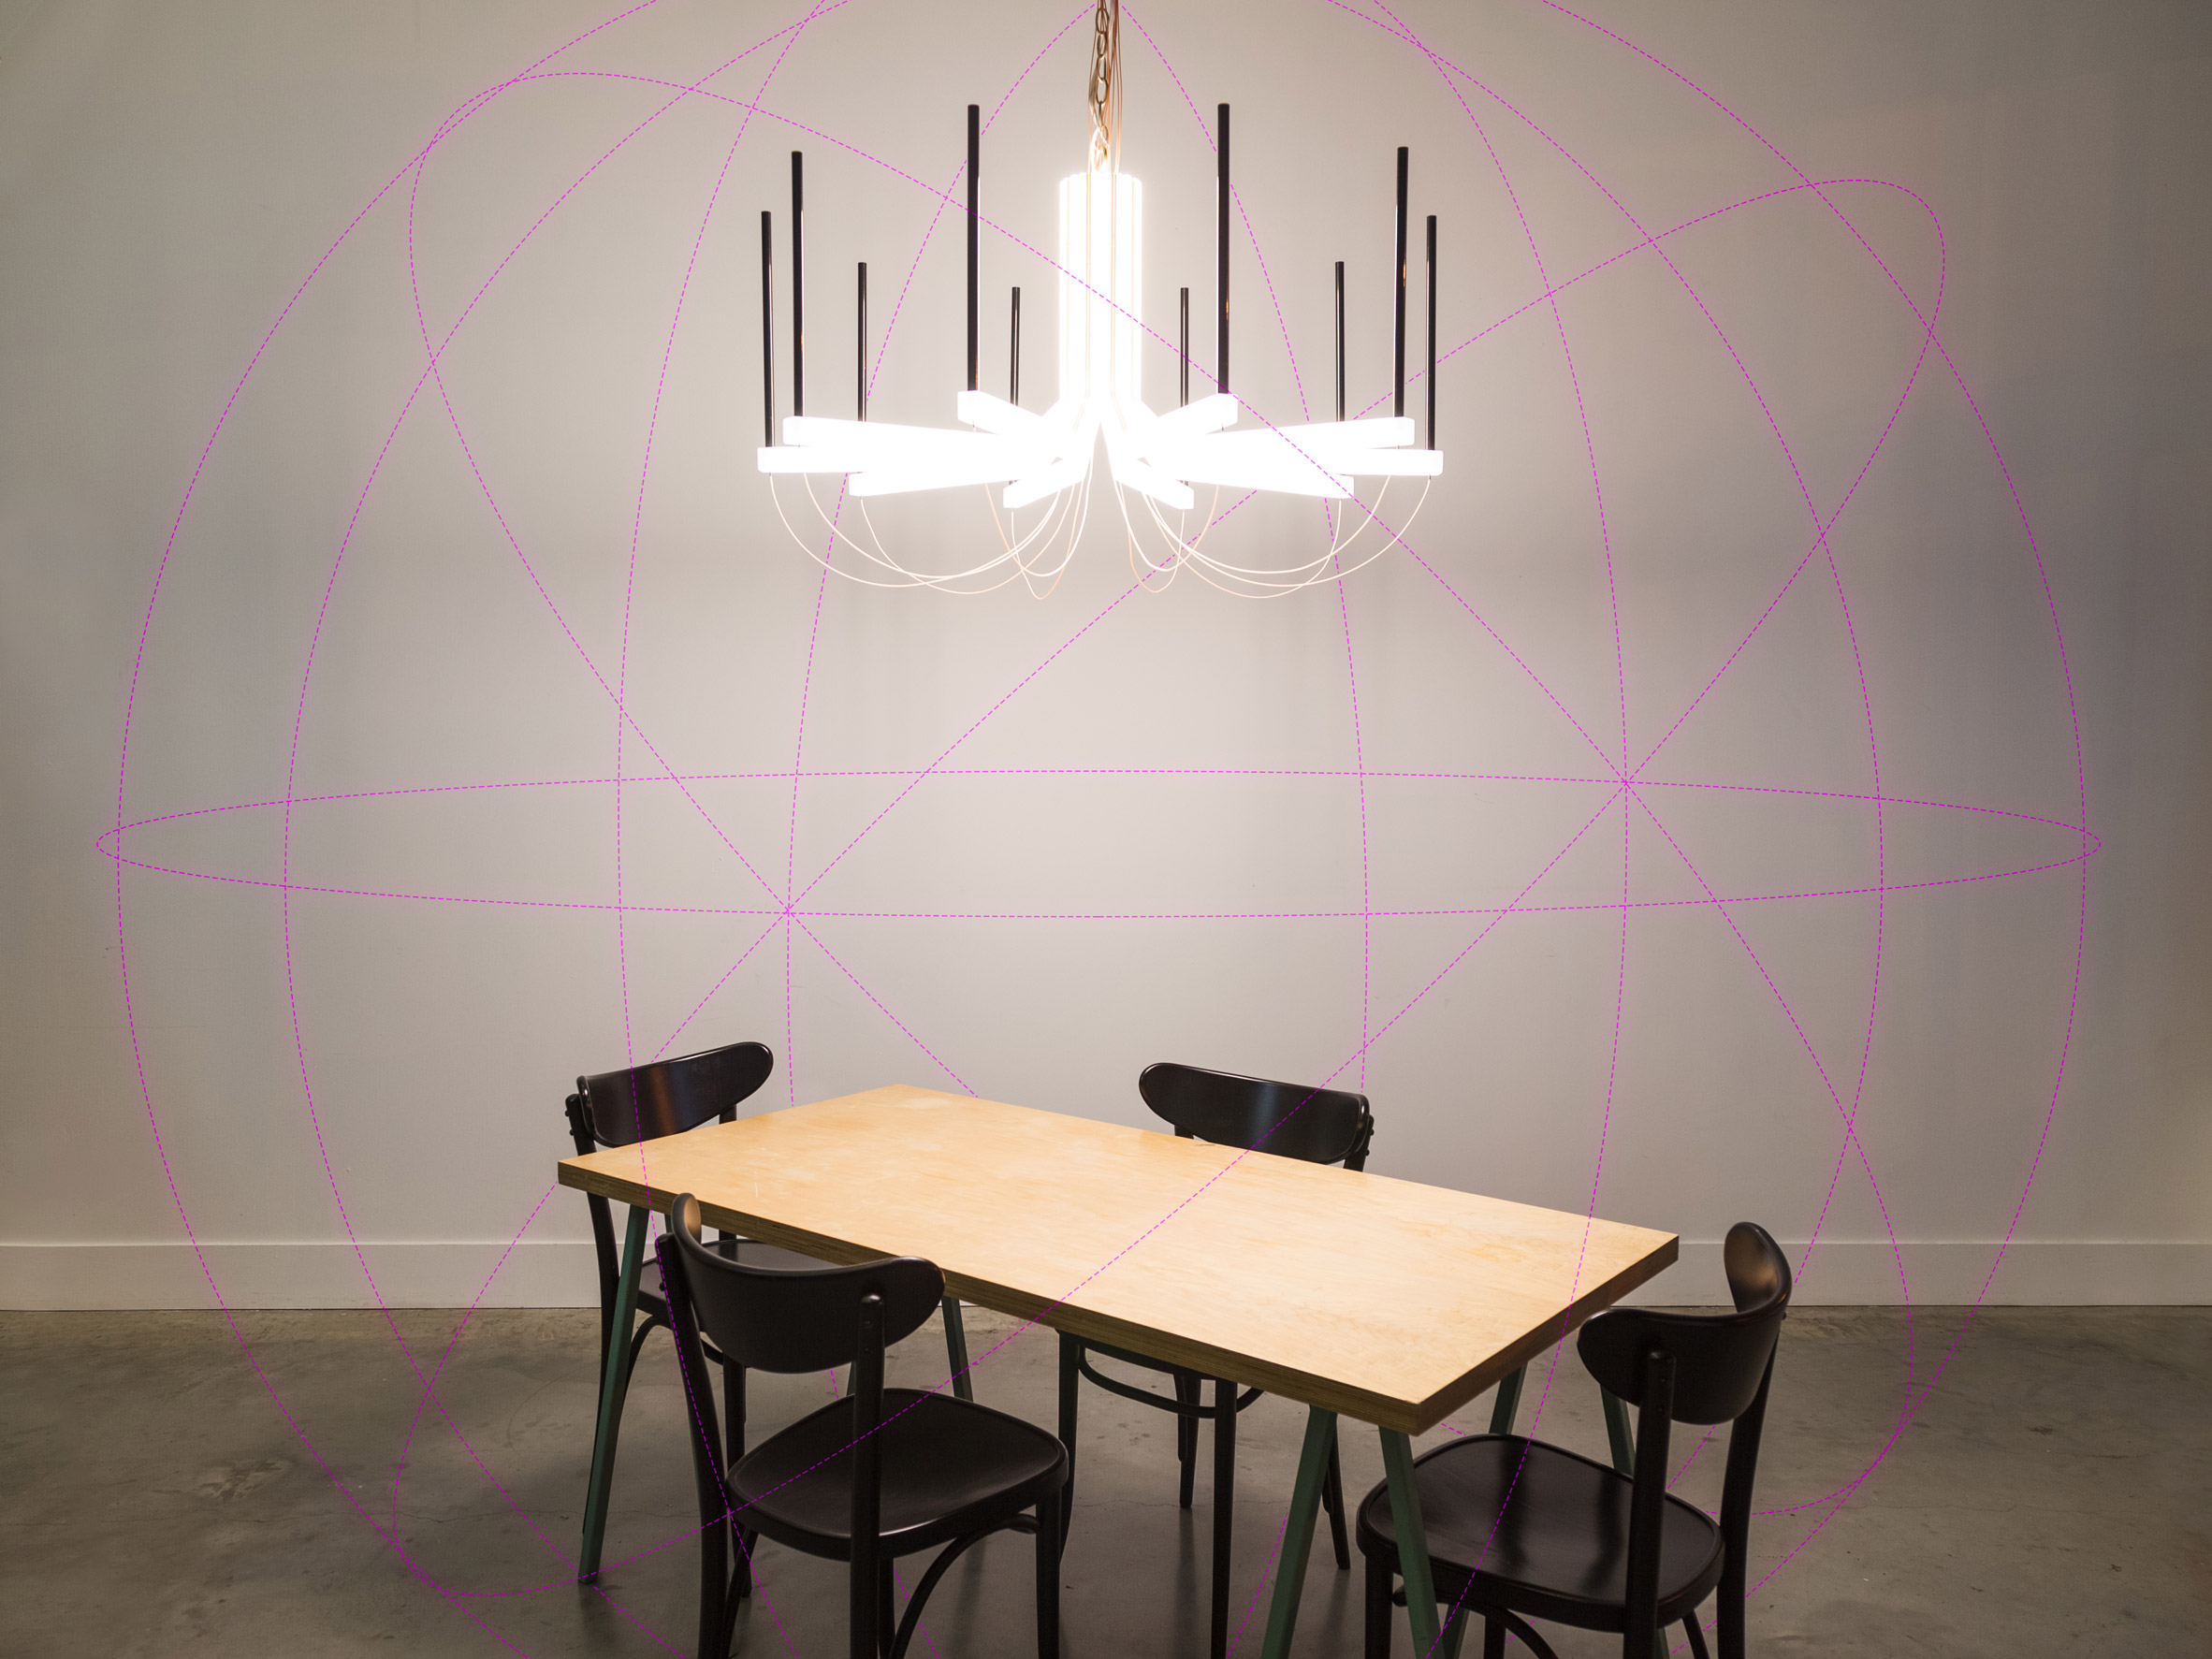 The chandelier is designed as a tech-free zone